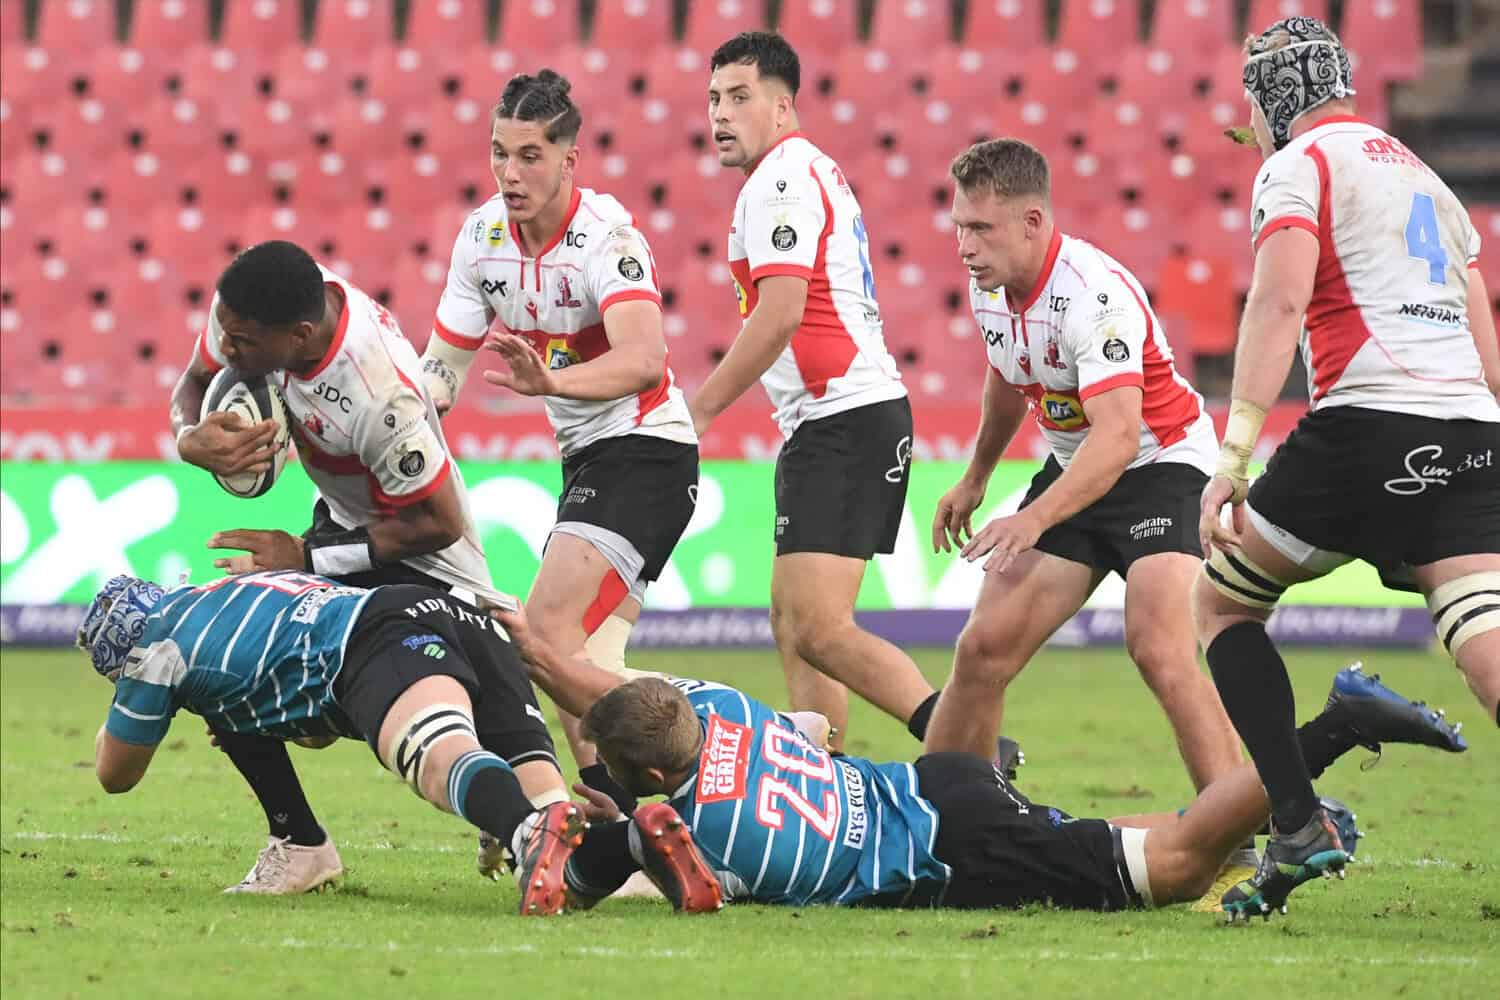 Lions and Bulls eager to continue winning runs in Currie Cup